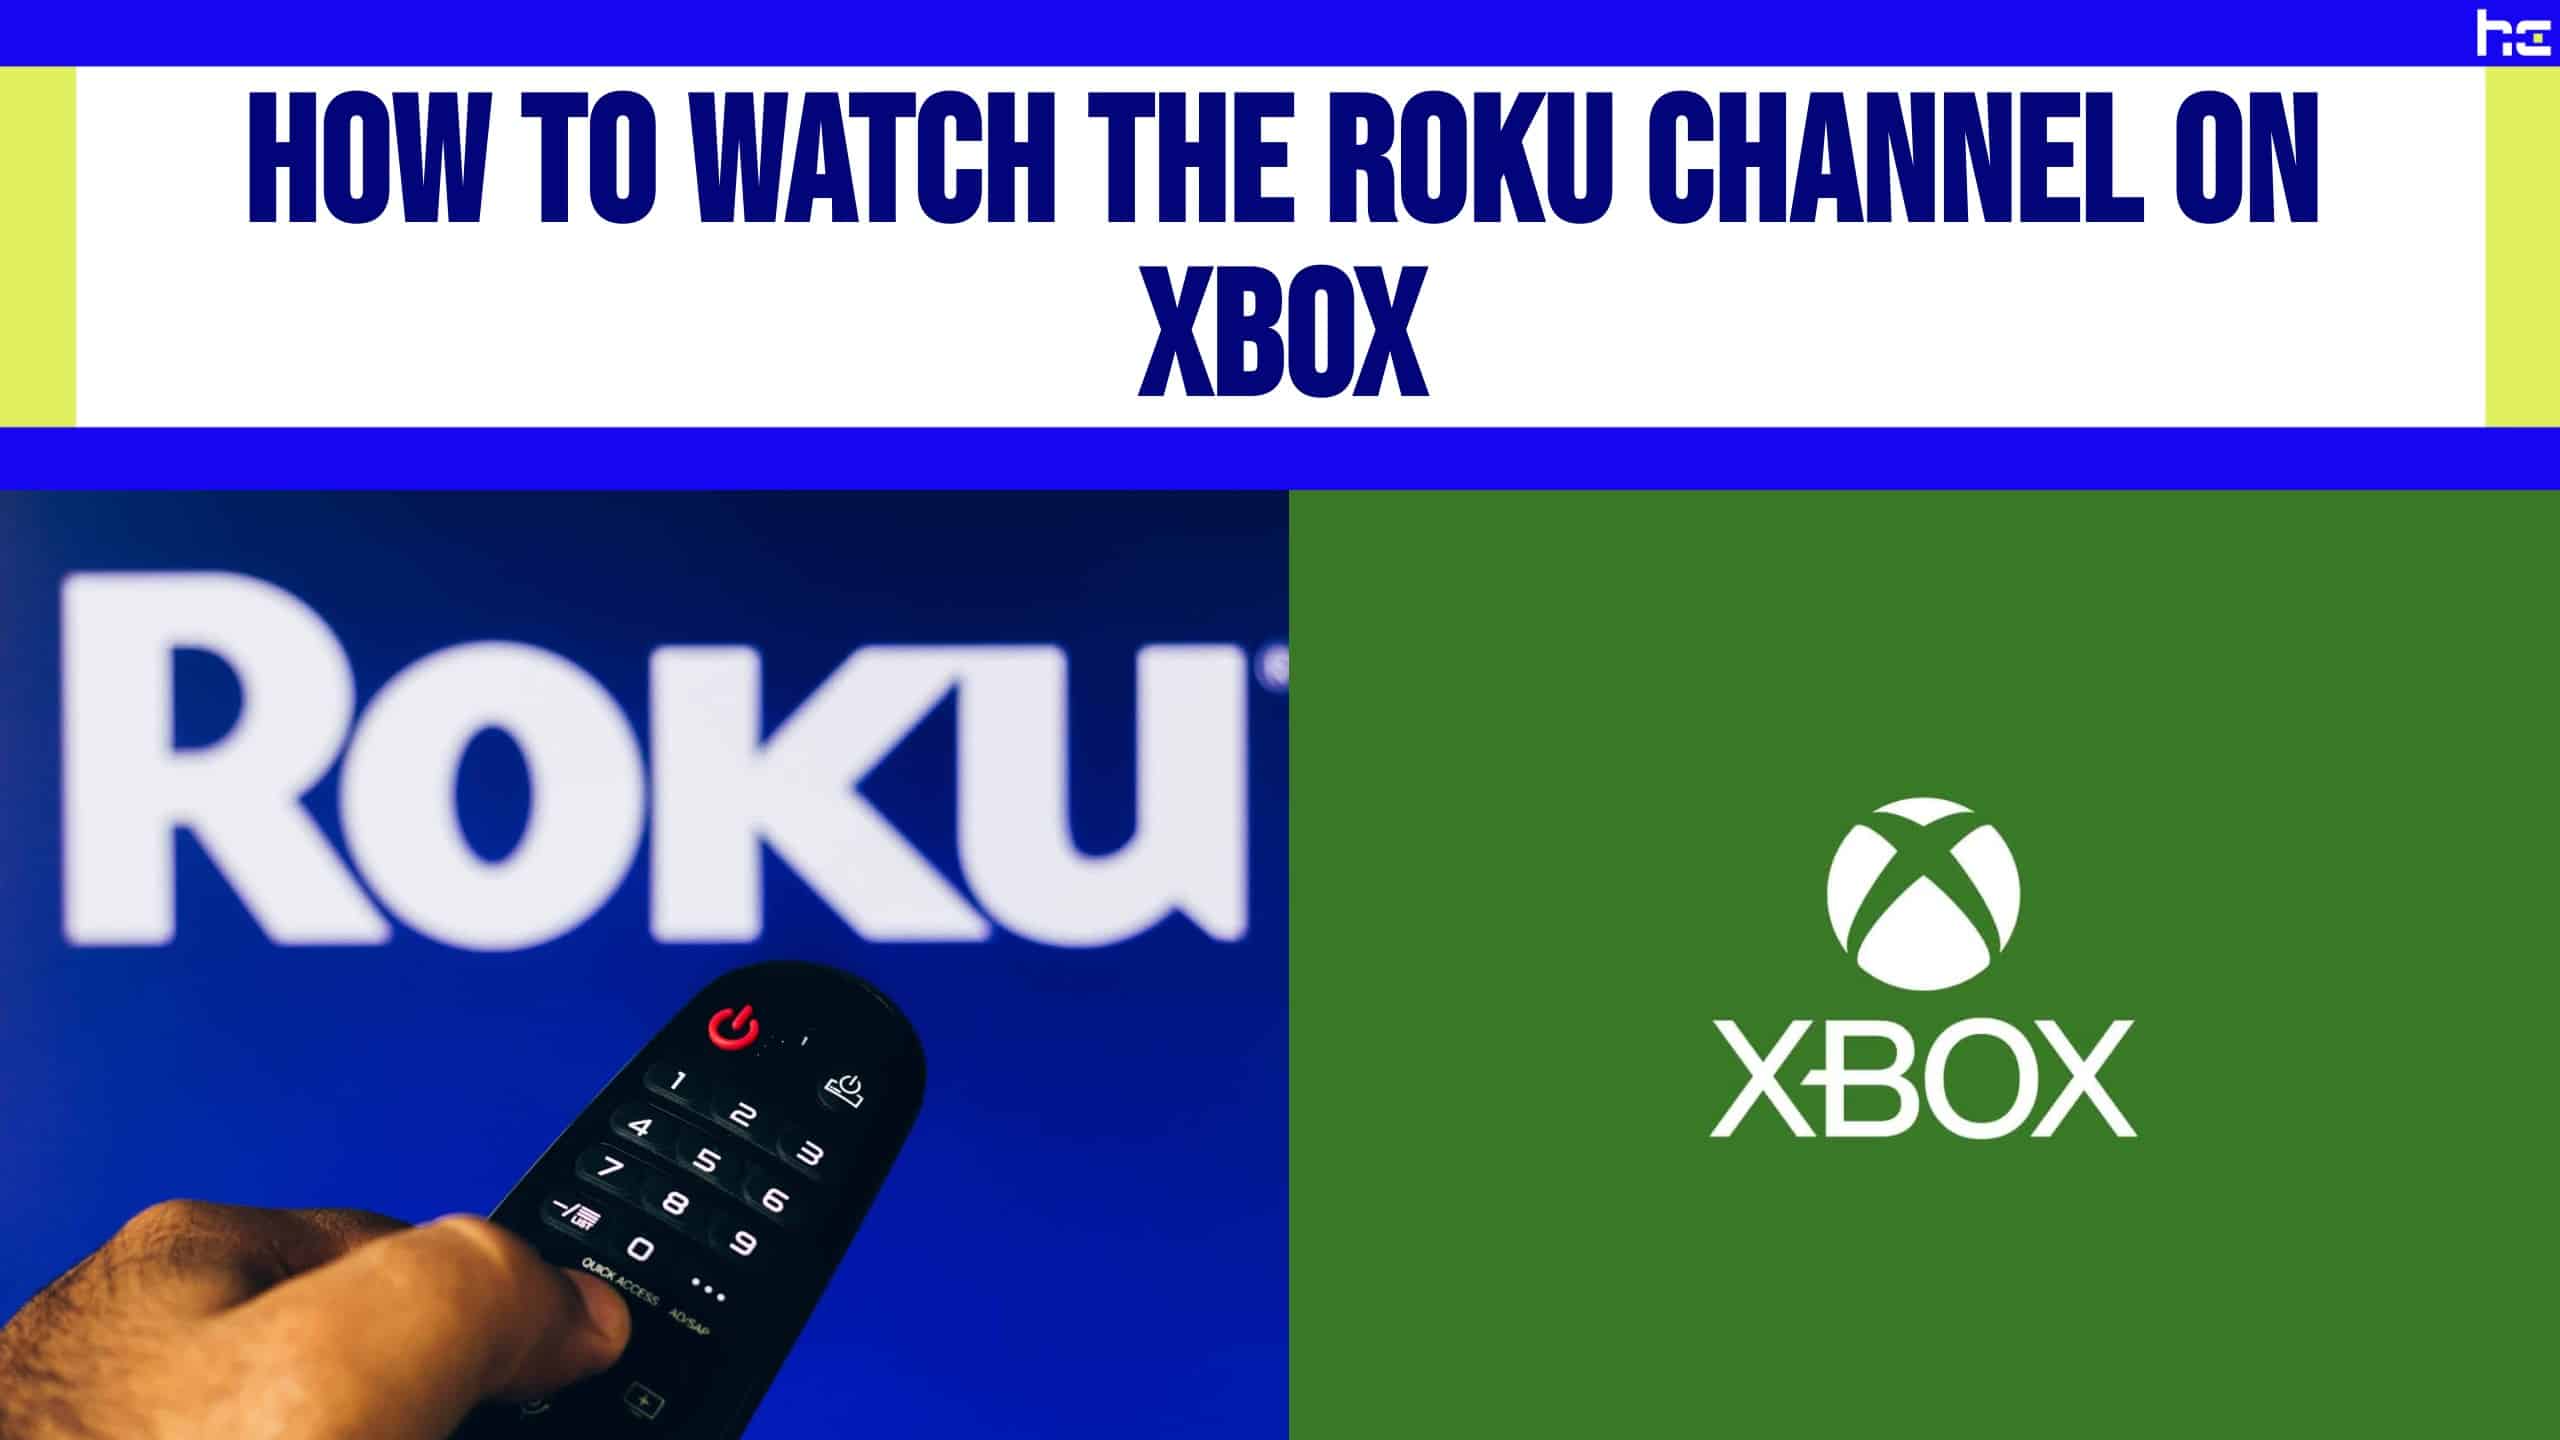 The Roku channel on Xbox